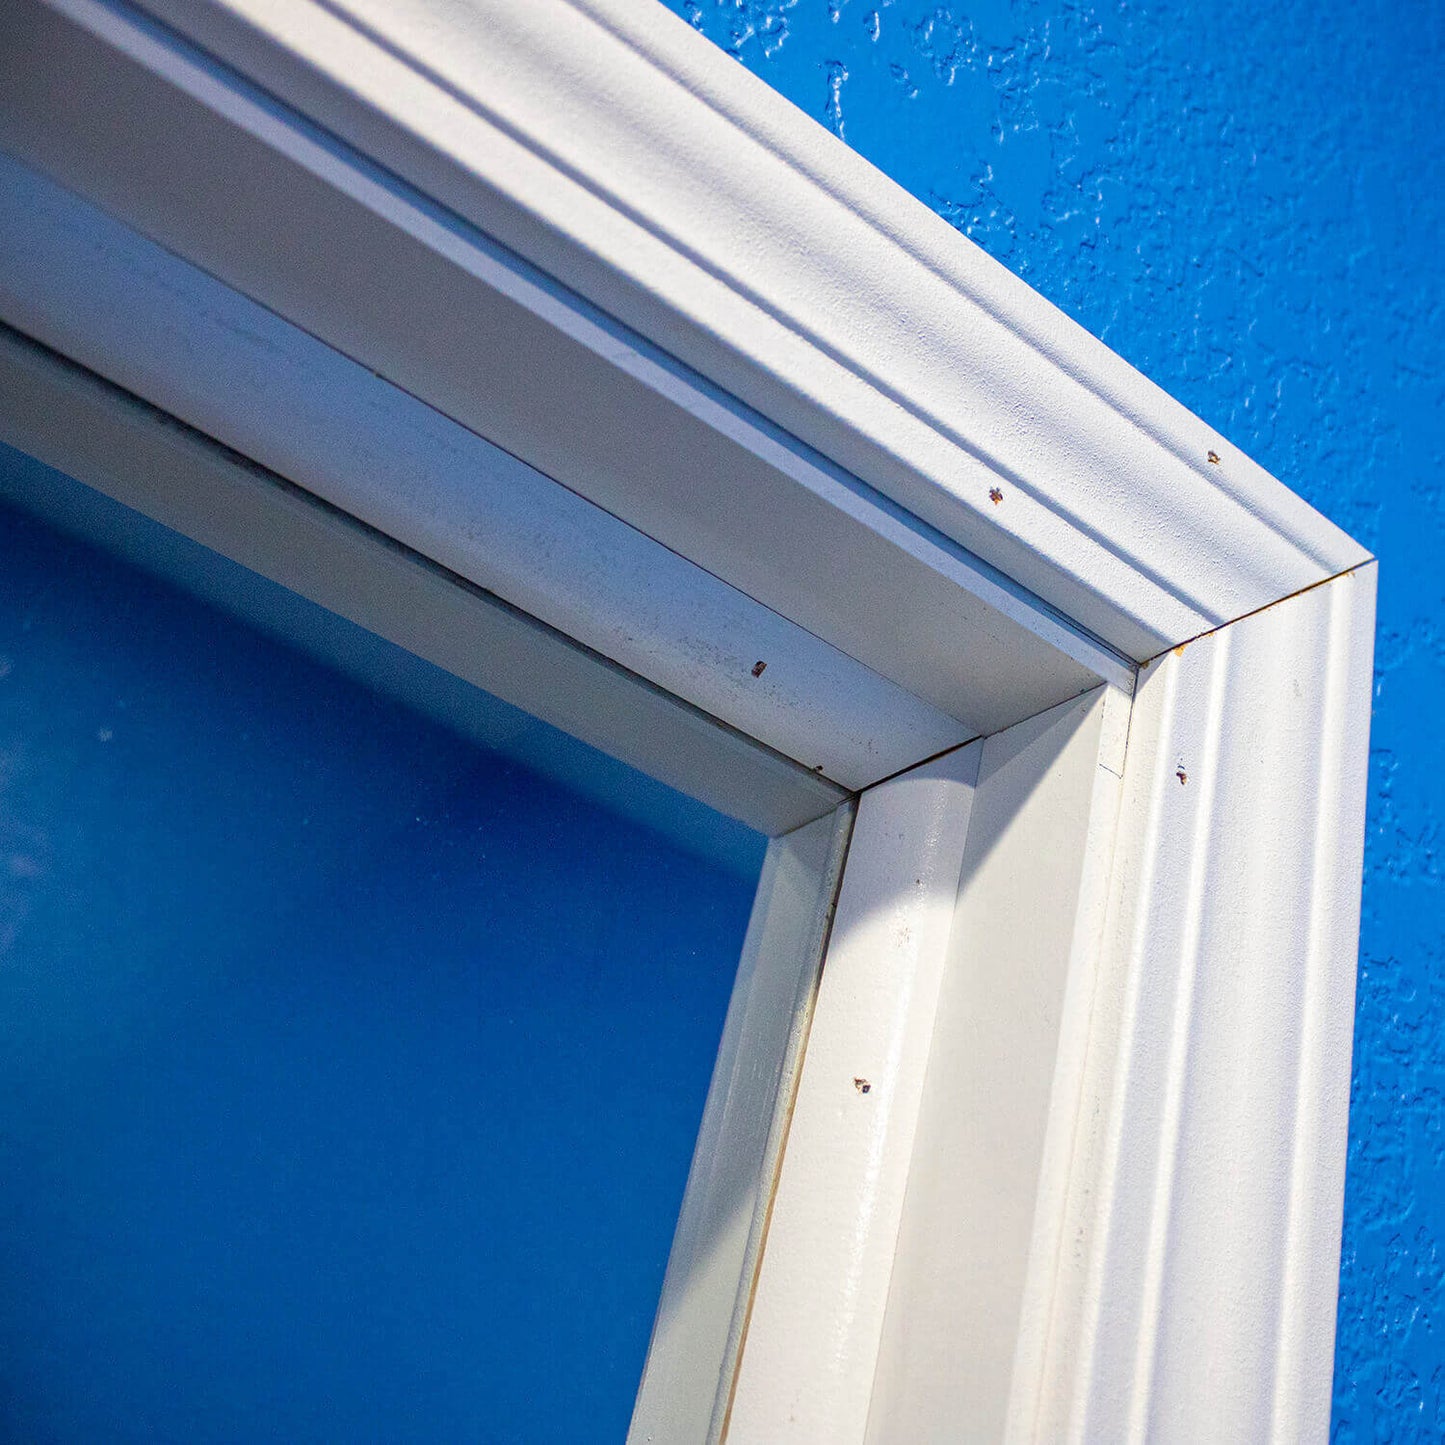 Finish Nails used for "finishing" projects and are non-structural in nature. Common uses for a finish nail are installing crown molding, baseboards, paneling and other projects